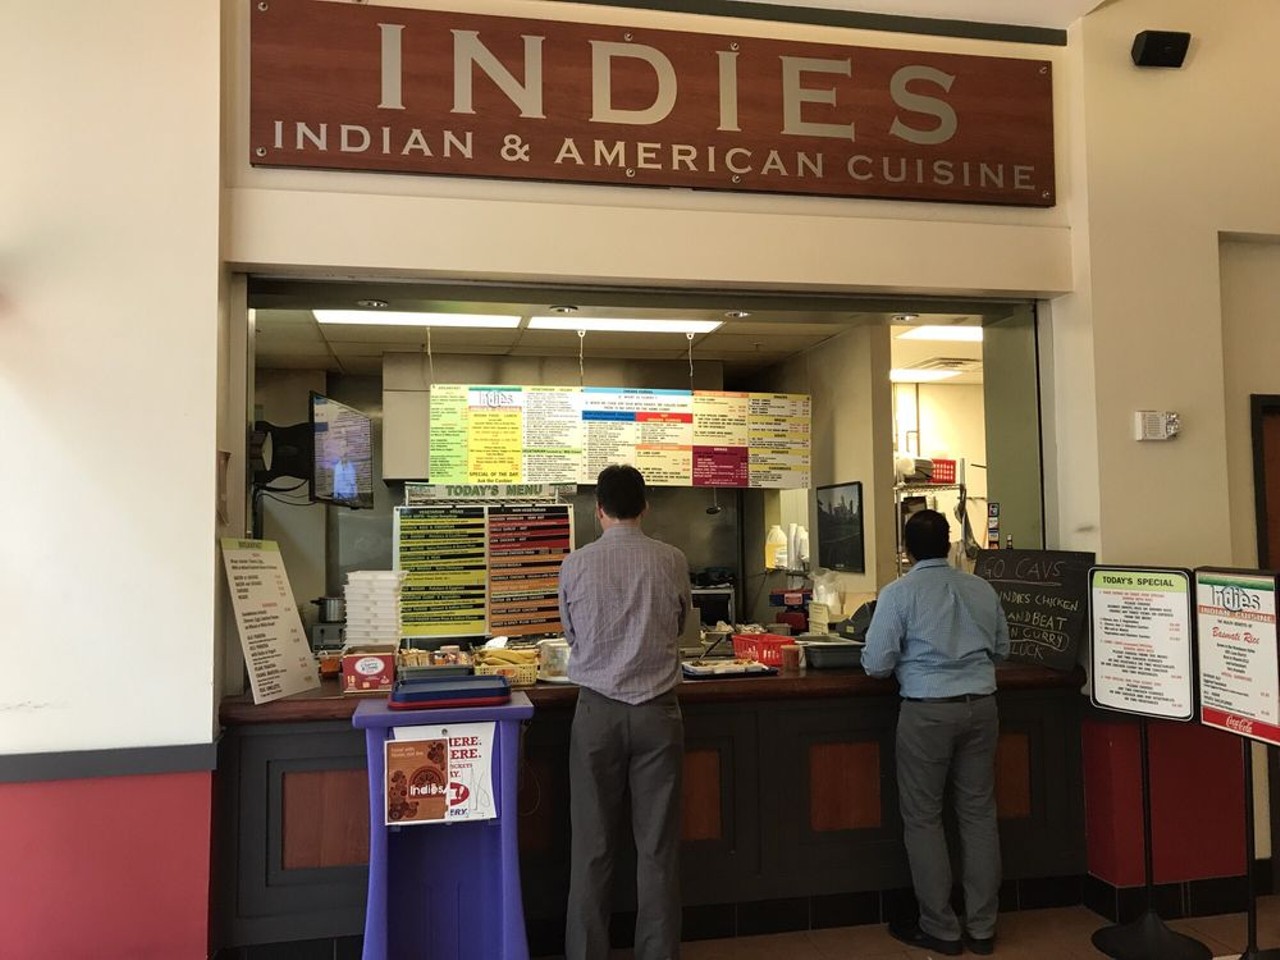  Indies
530 Euclid Ave., Cleveland 
This Indian food stand in the food court of the Fifth Street Arcade serves traditional Indian food like chicken tikka masala and butter chicken over rice all for a very reasonable price of under $9.
Photo via Indies/Yelp